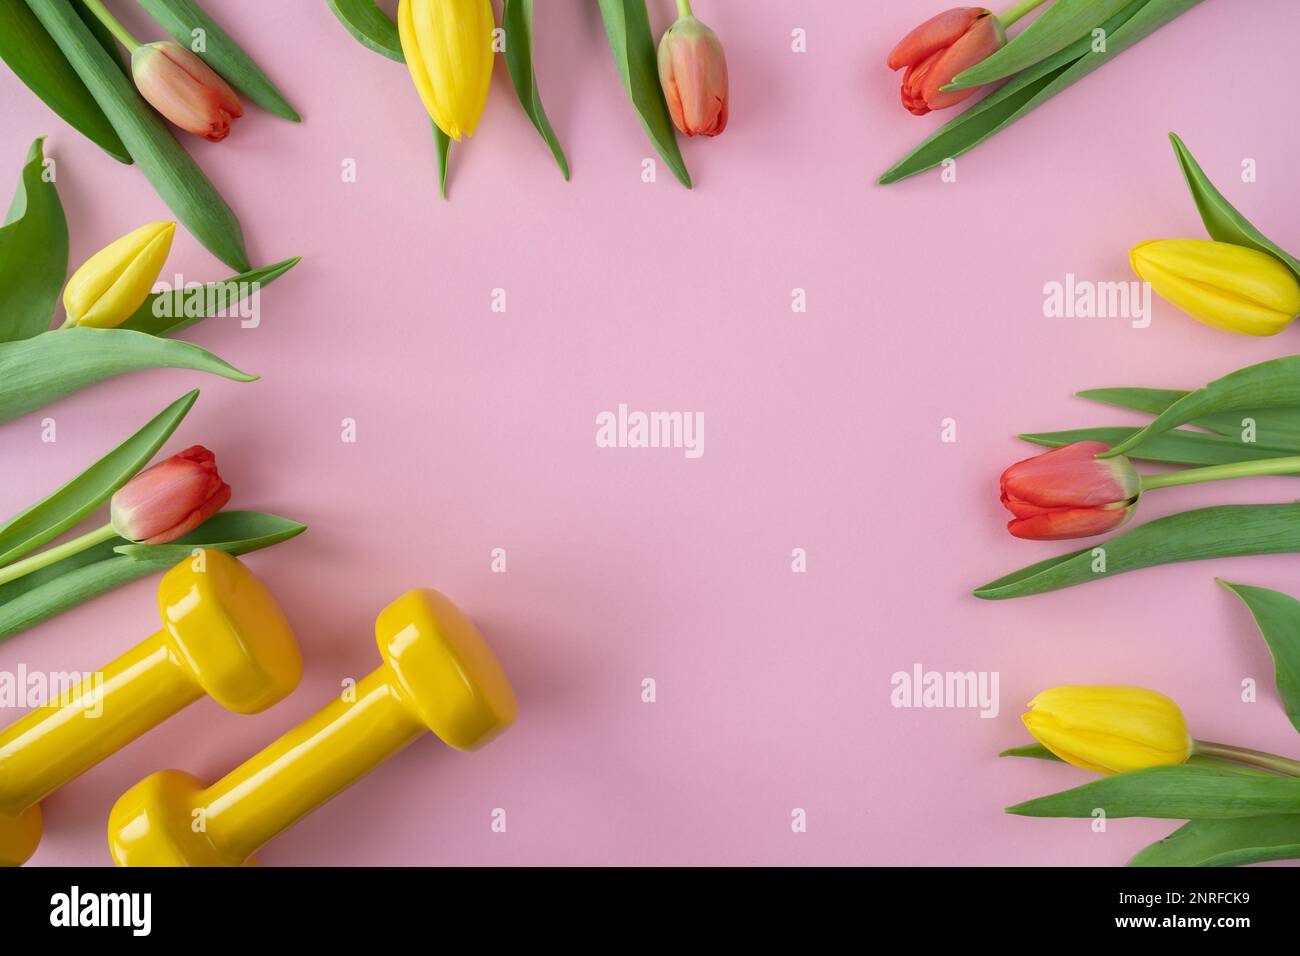 Gym dumbbells and tulips flowers as a gift for Women's Day or birthday. Healthy fitness workout, sport training flat lay with copy space. Stock Photo